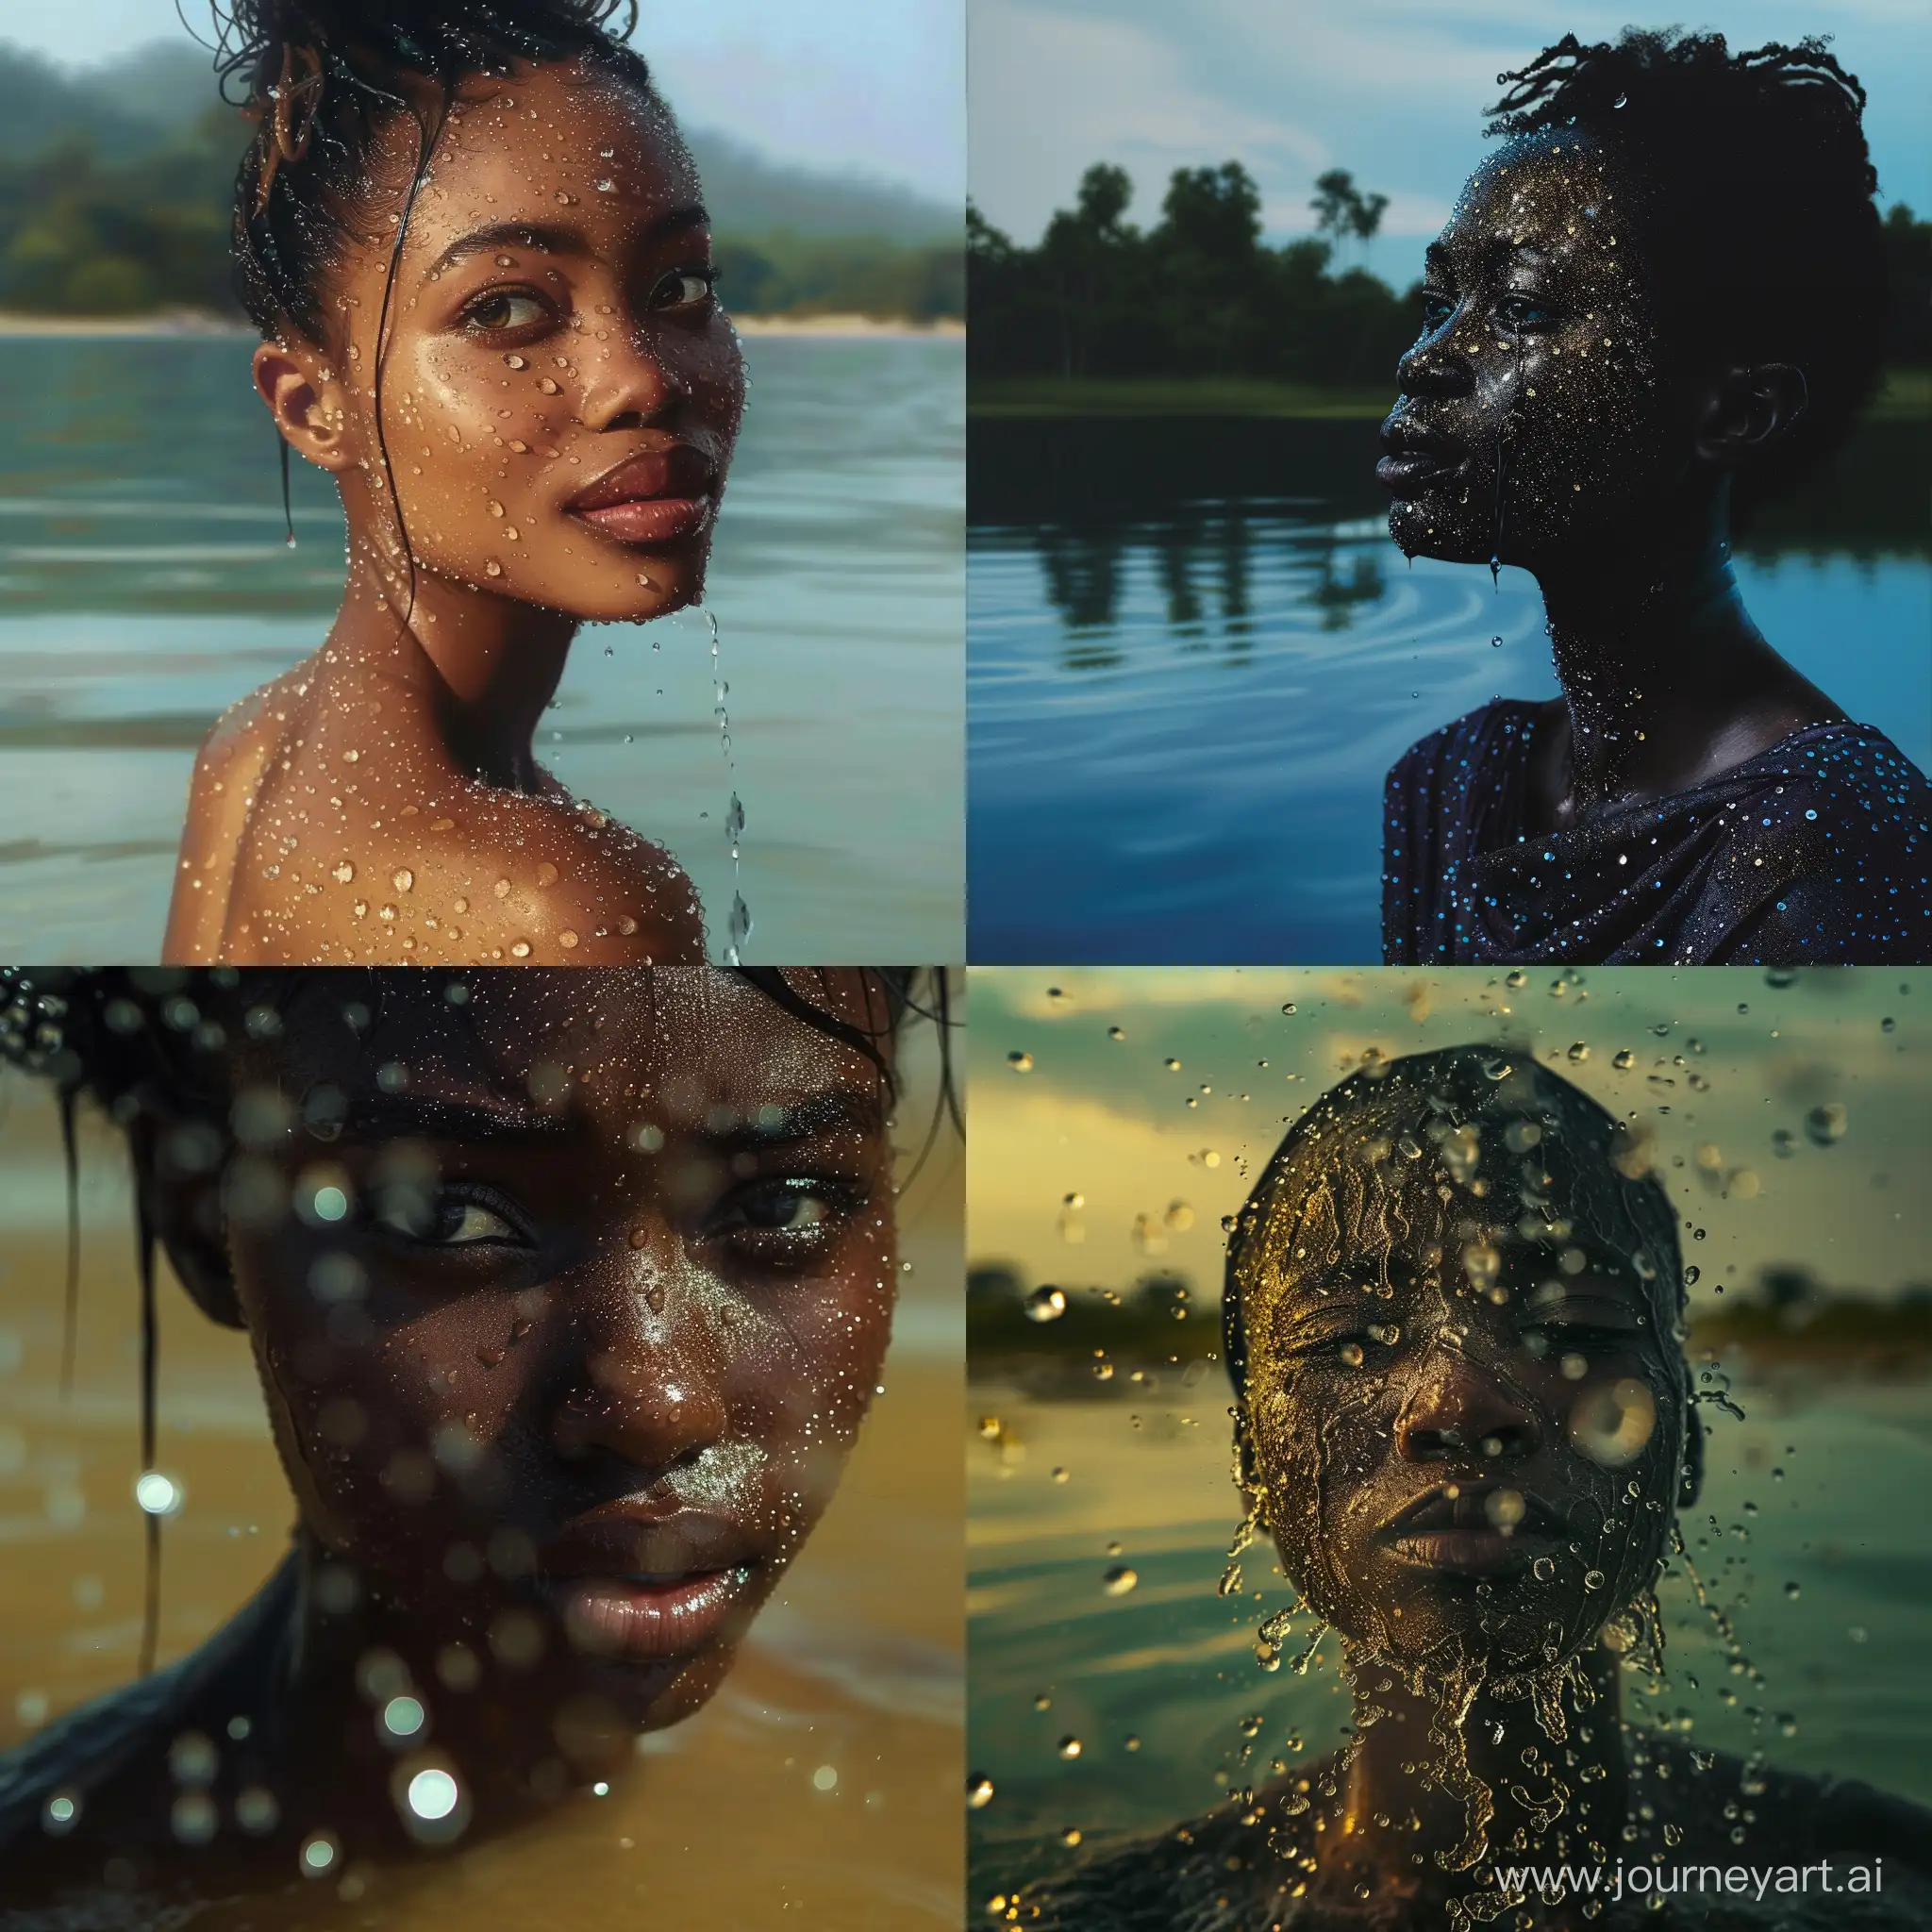 Art African woman with water droplets on her face, and shoulders in a lake.